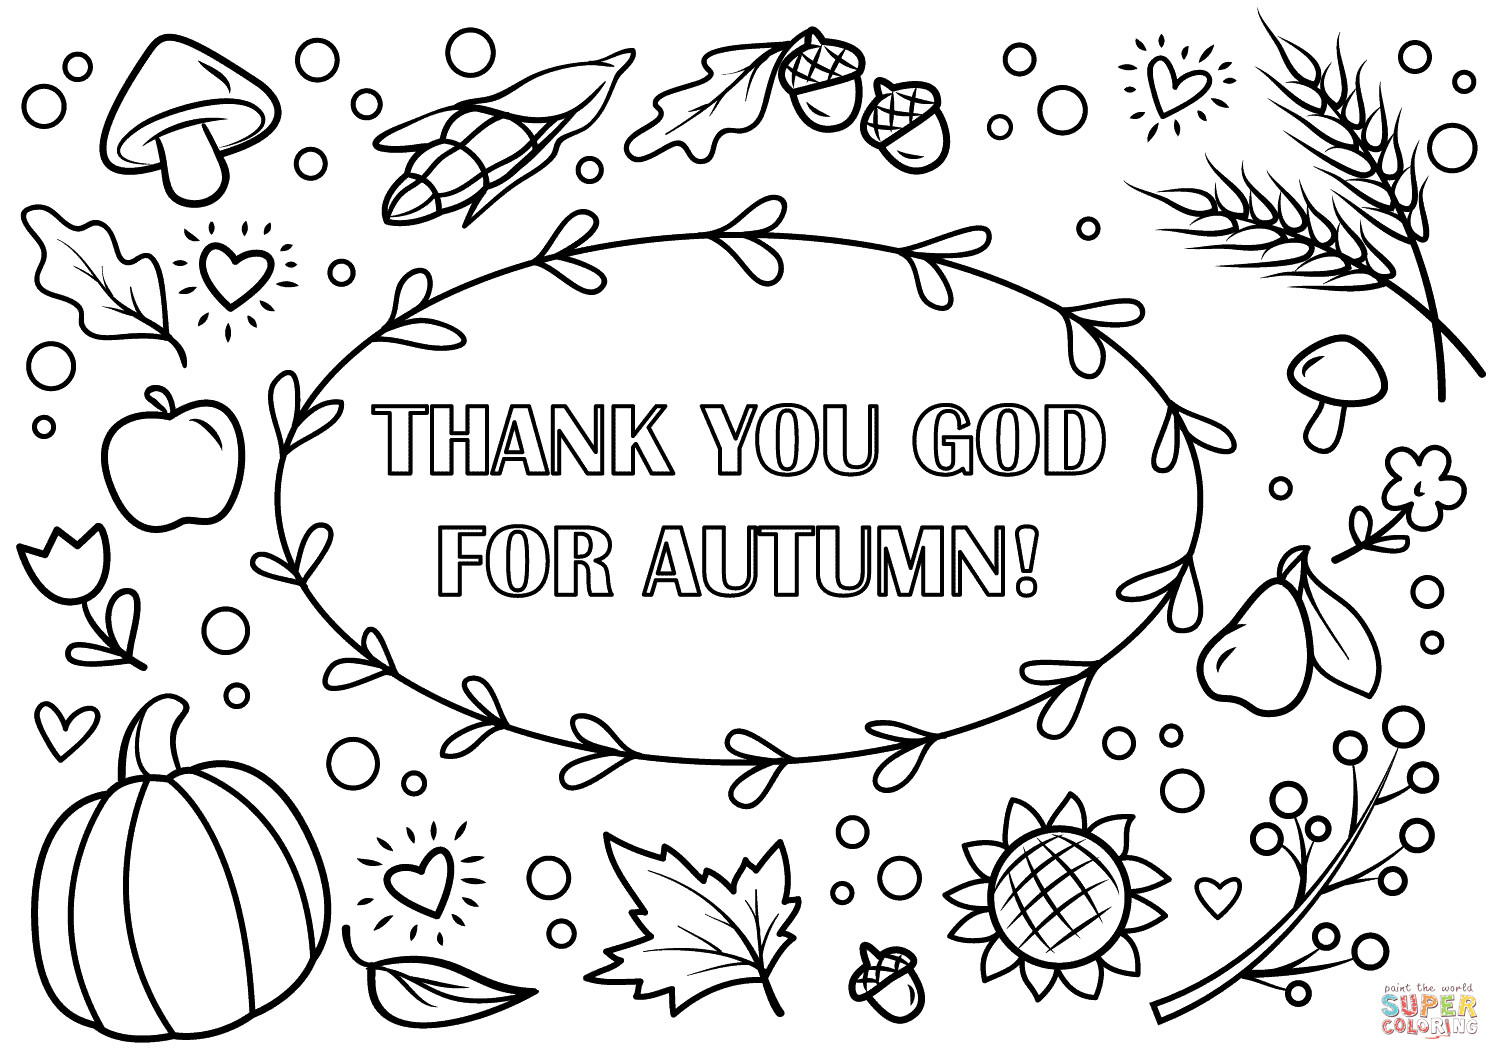 Free Printable Autumn Coloring Pages
 Thank You God for Autumn coloring page